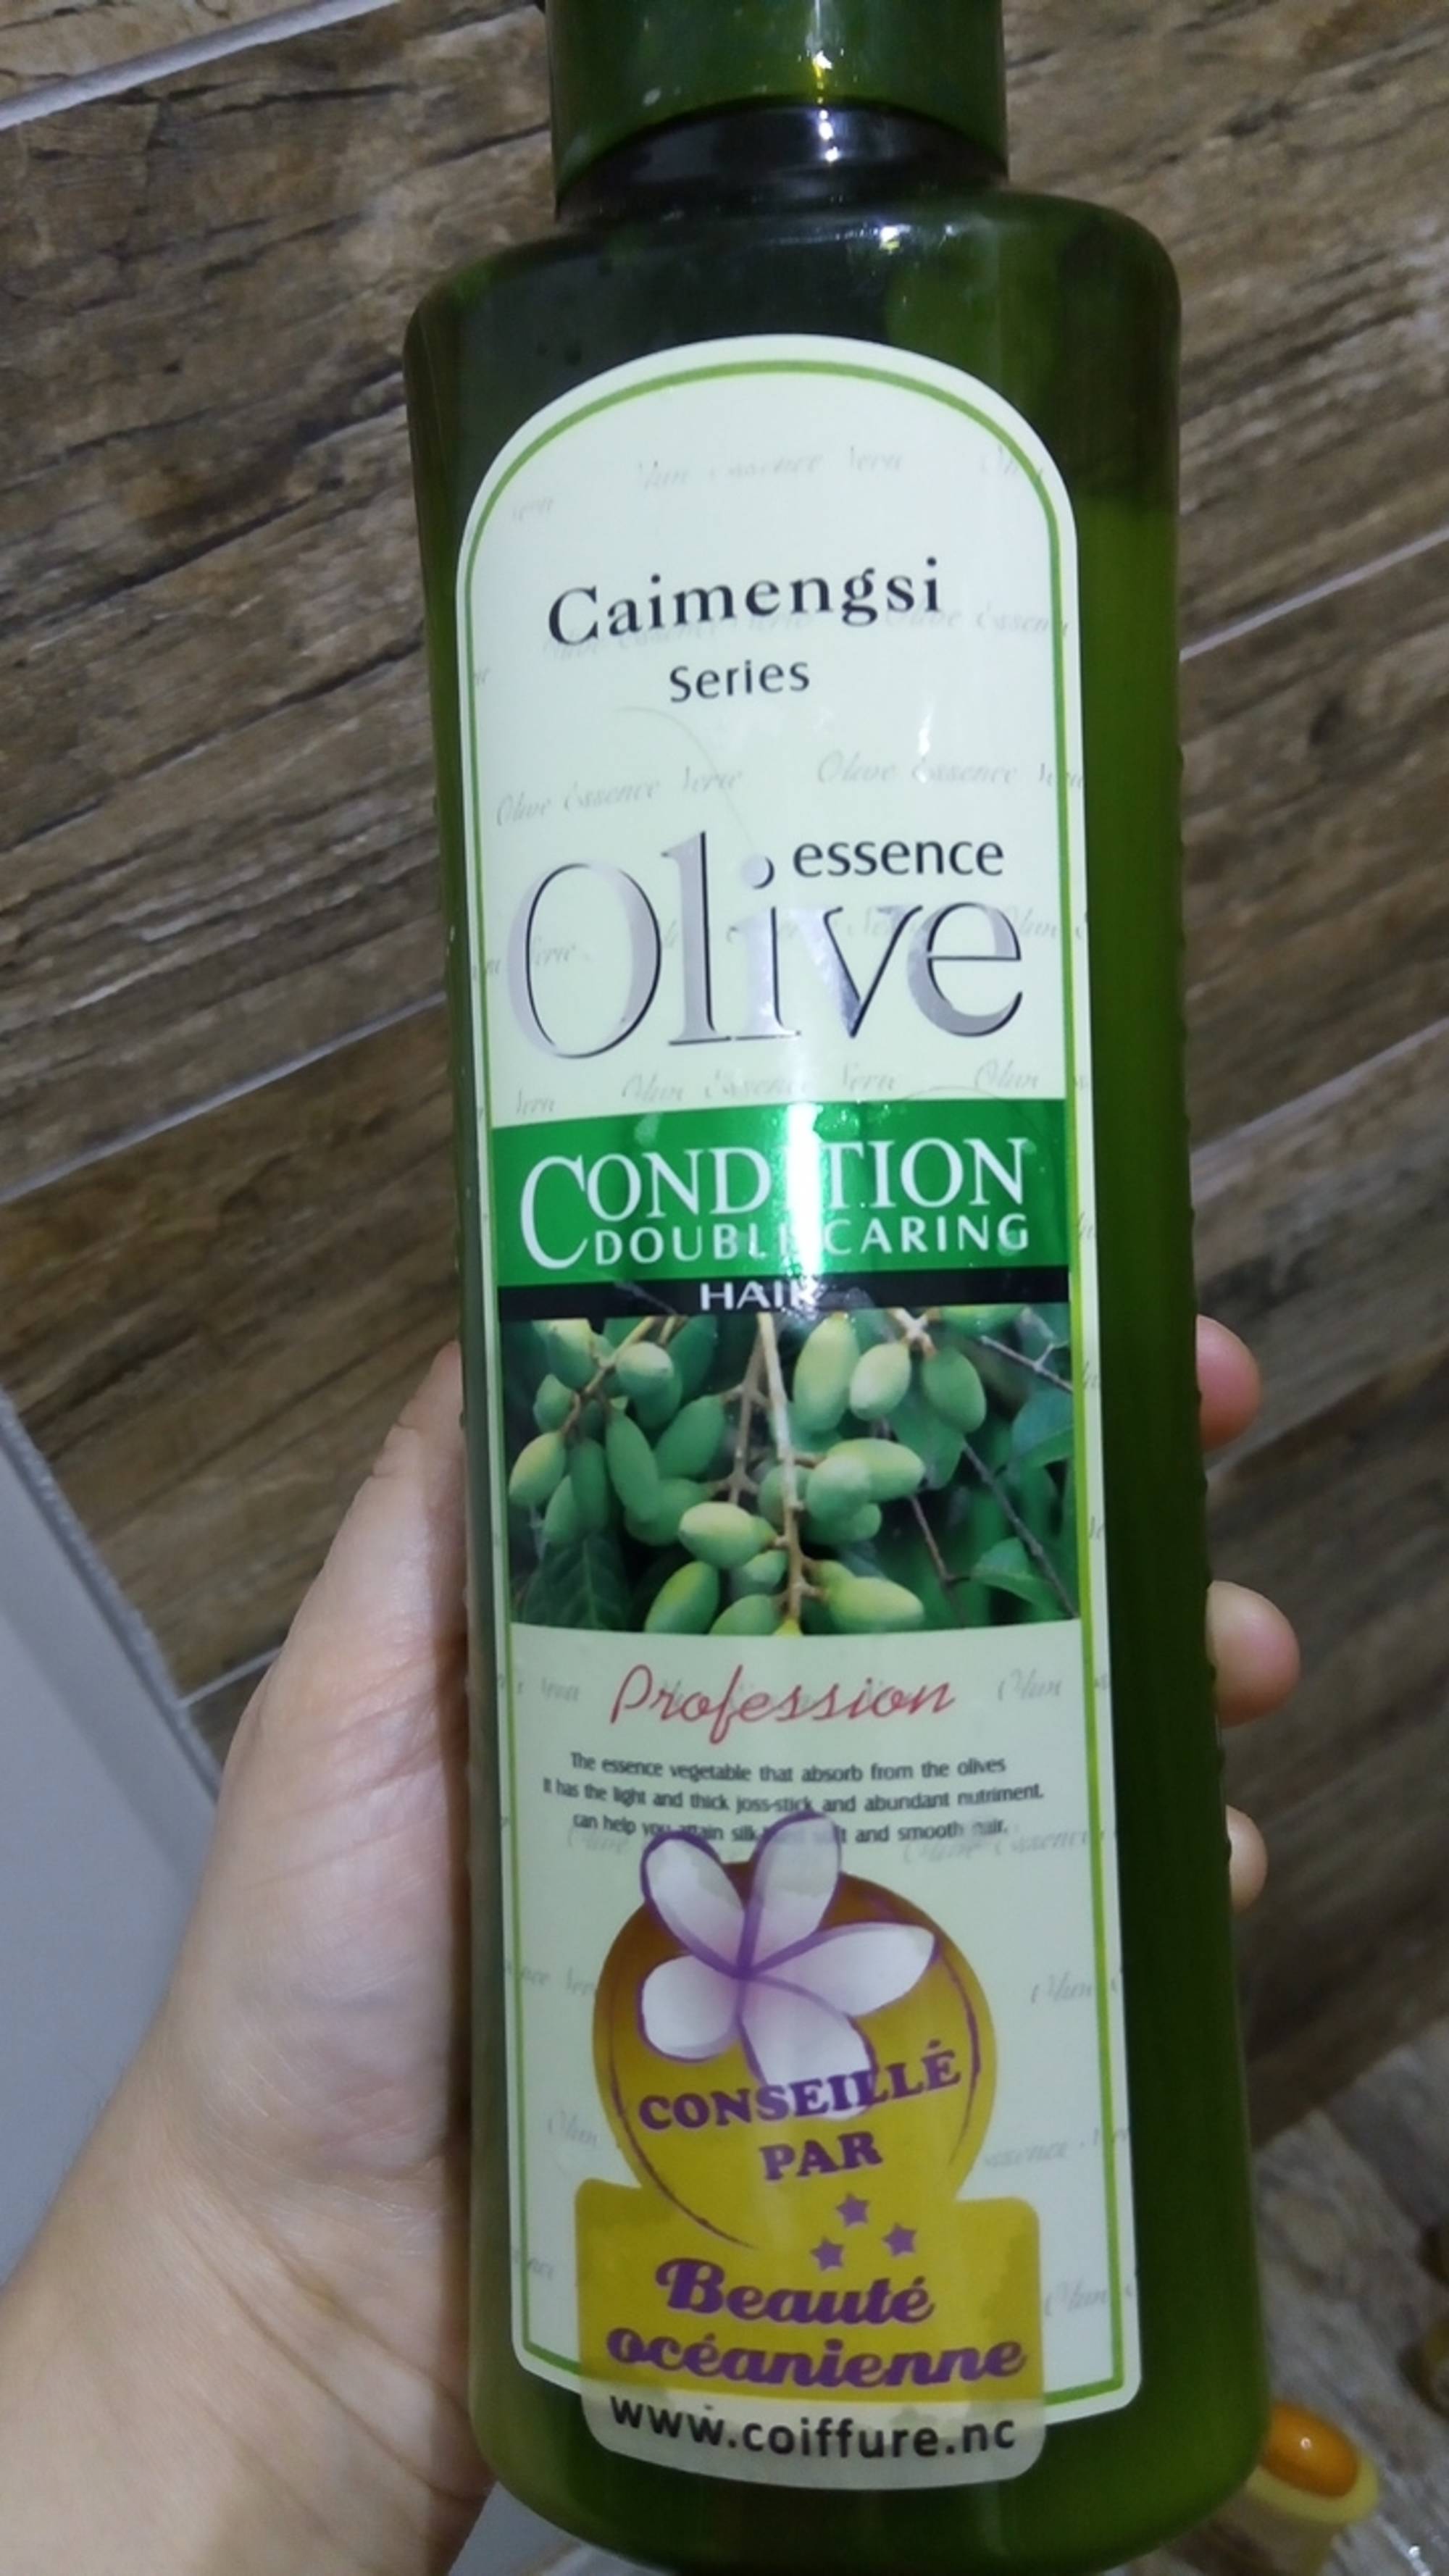 CAIMENGSI SERIES - Essence olive - Condition double caring hair